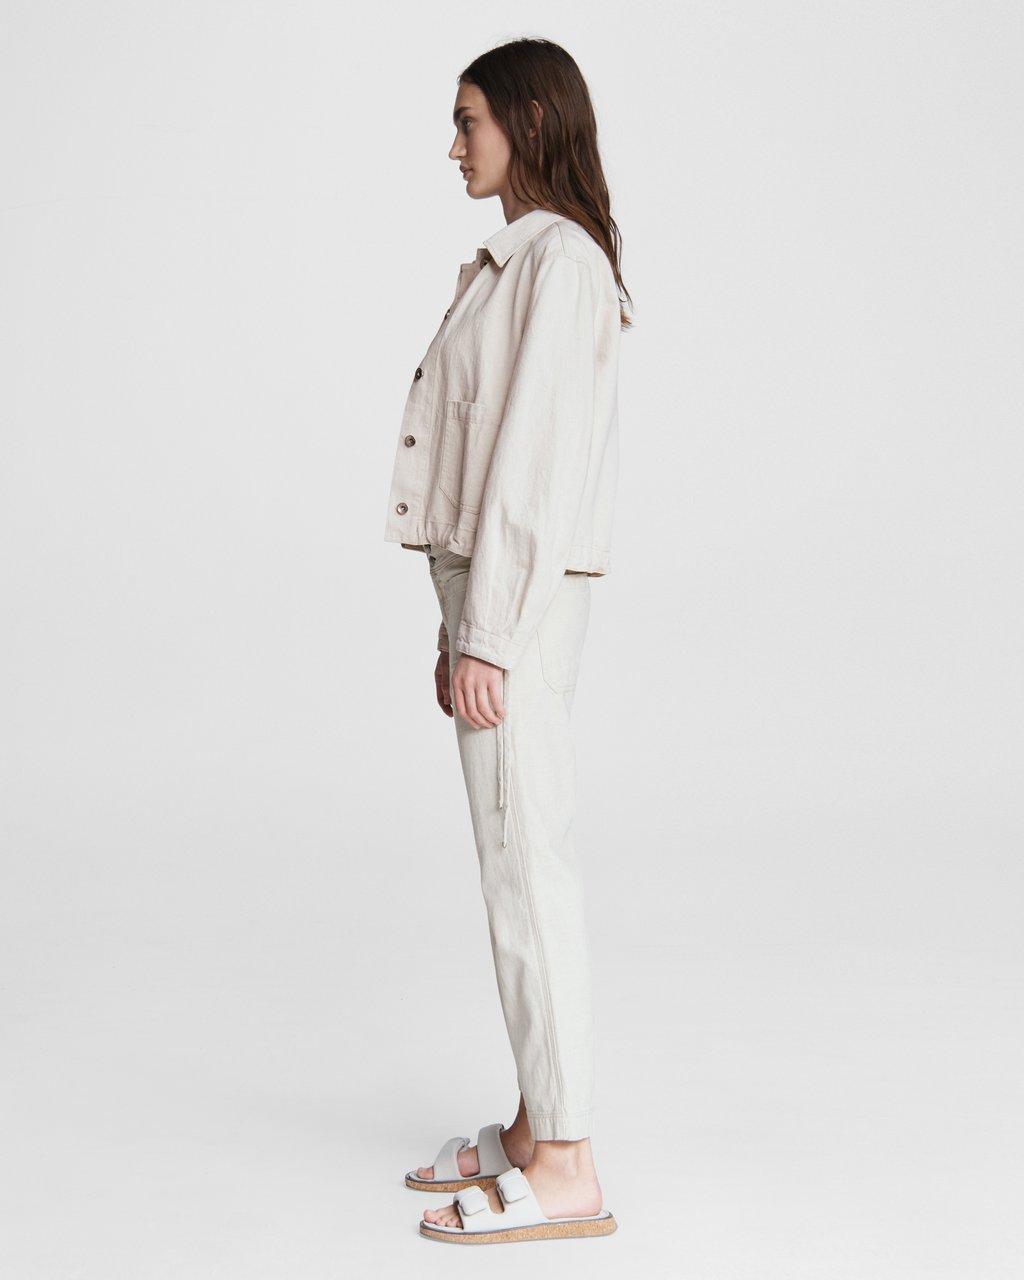 Women's Natural Naval Chore Jacket by Rag and Bone | Incu